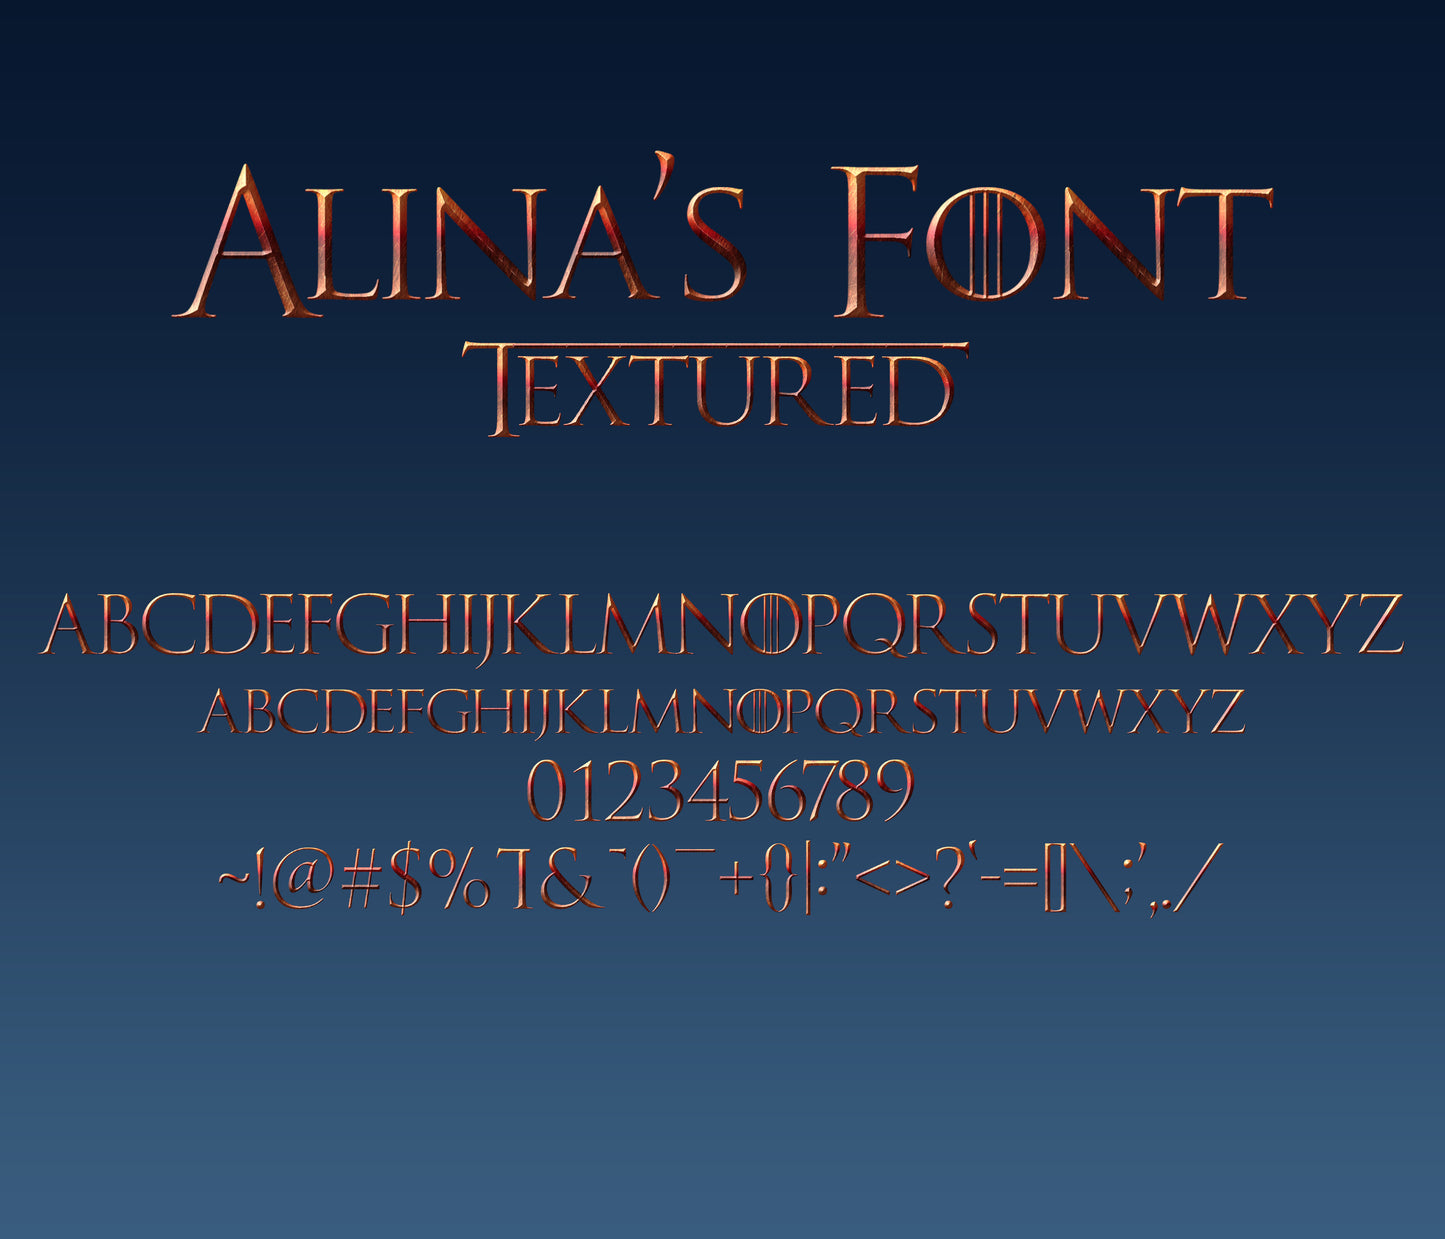 Westeros Font Textured